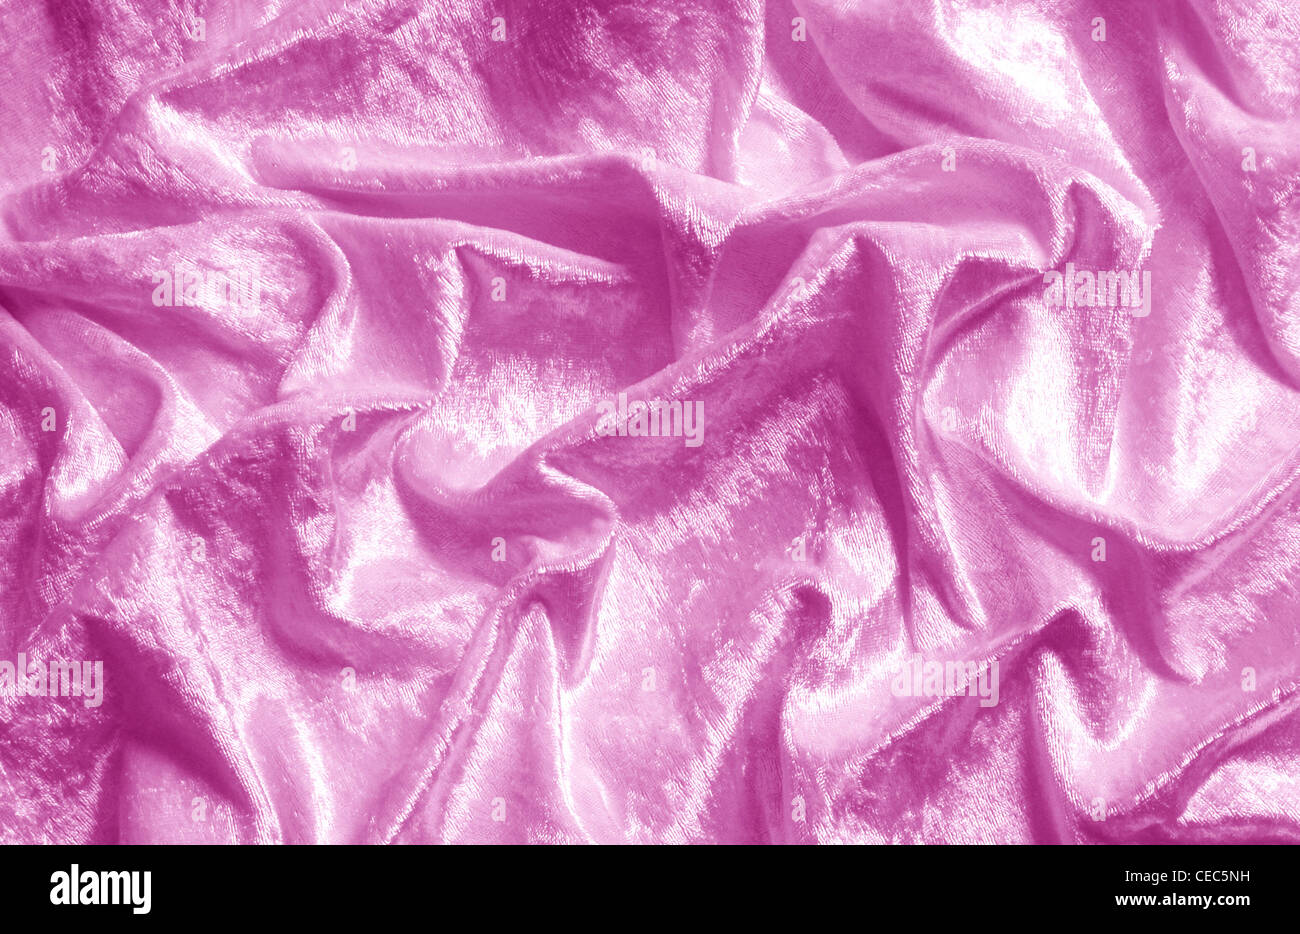 Pink textile background Stock Photo